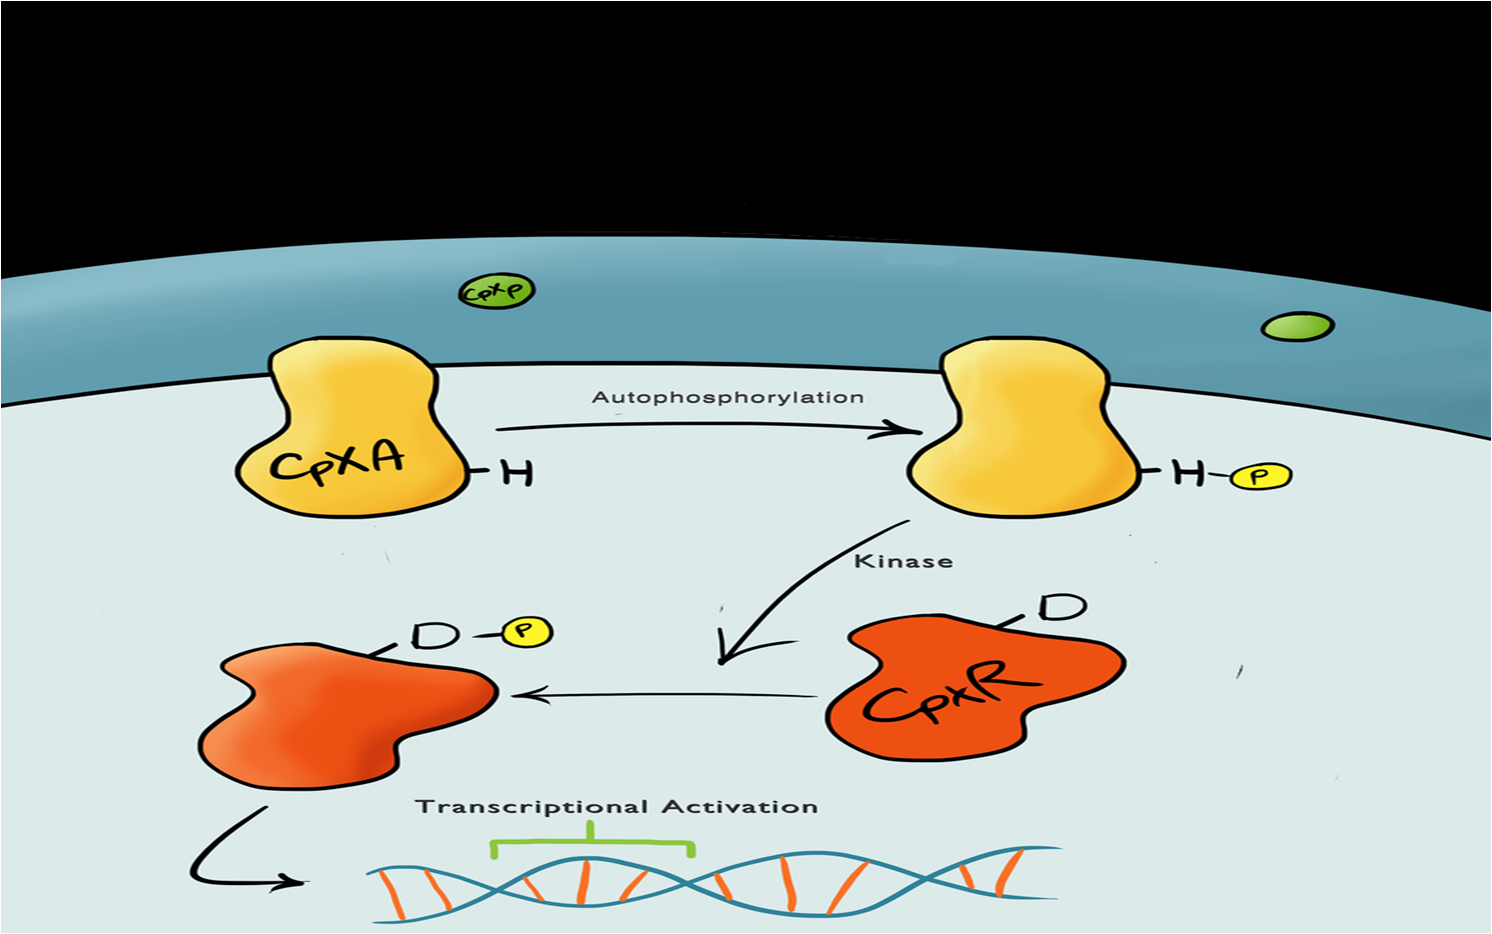 Cartoon schematic of the Cpx Pathway